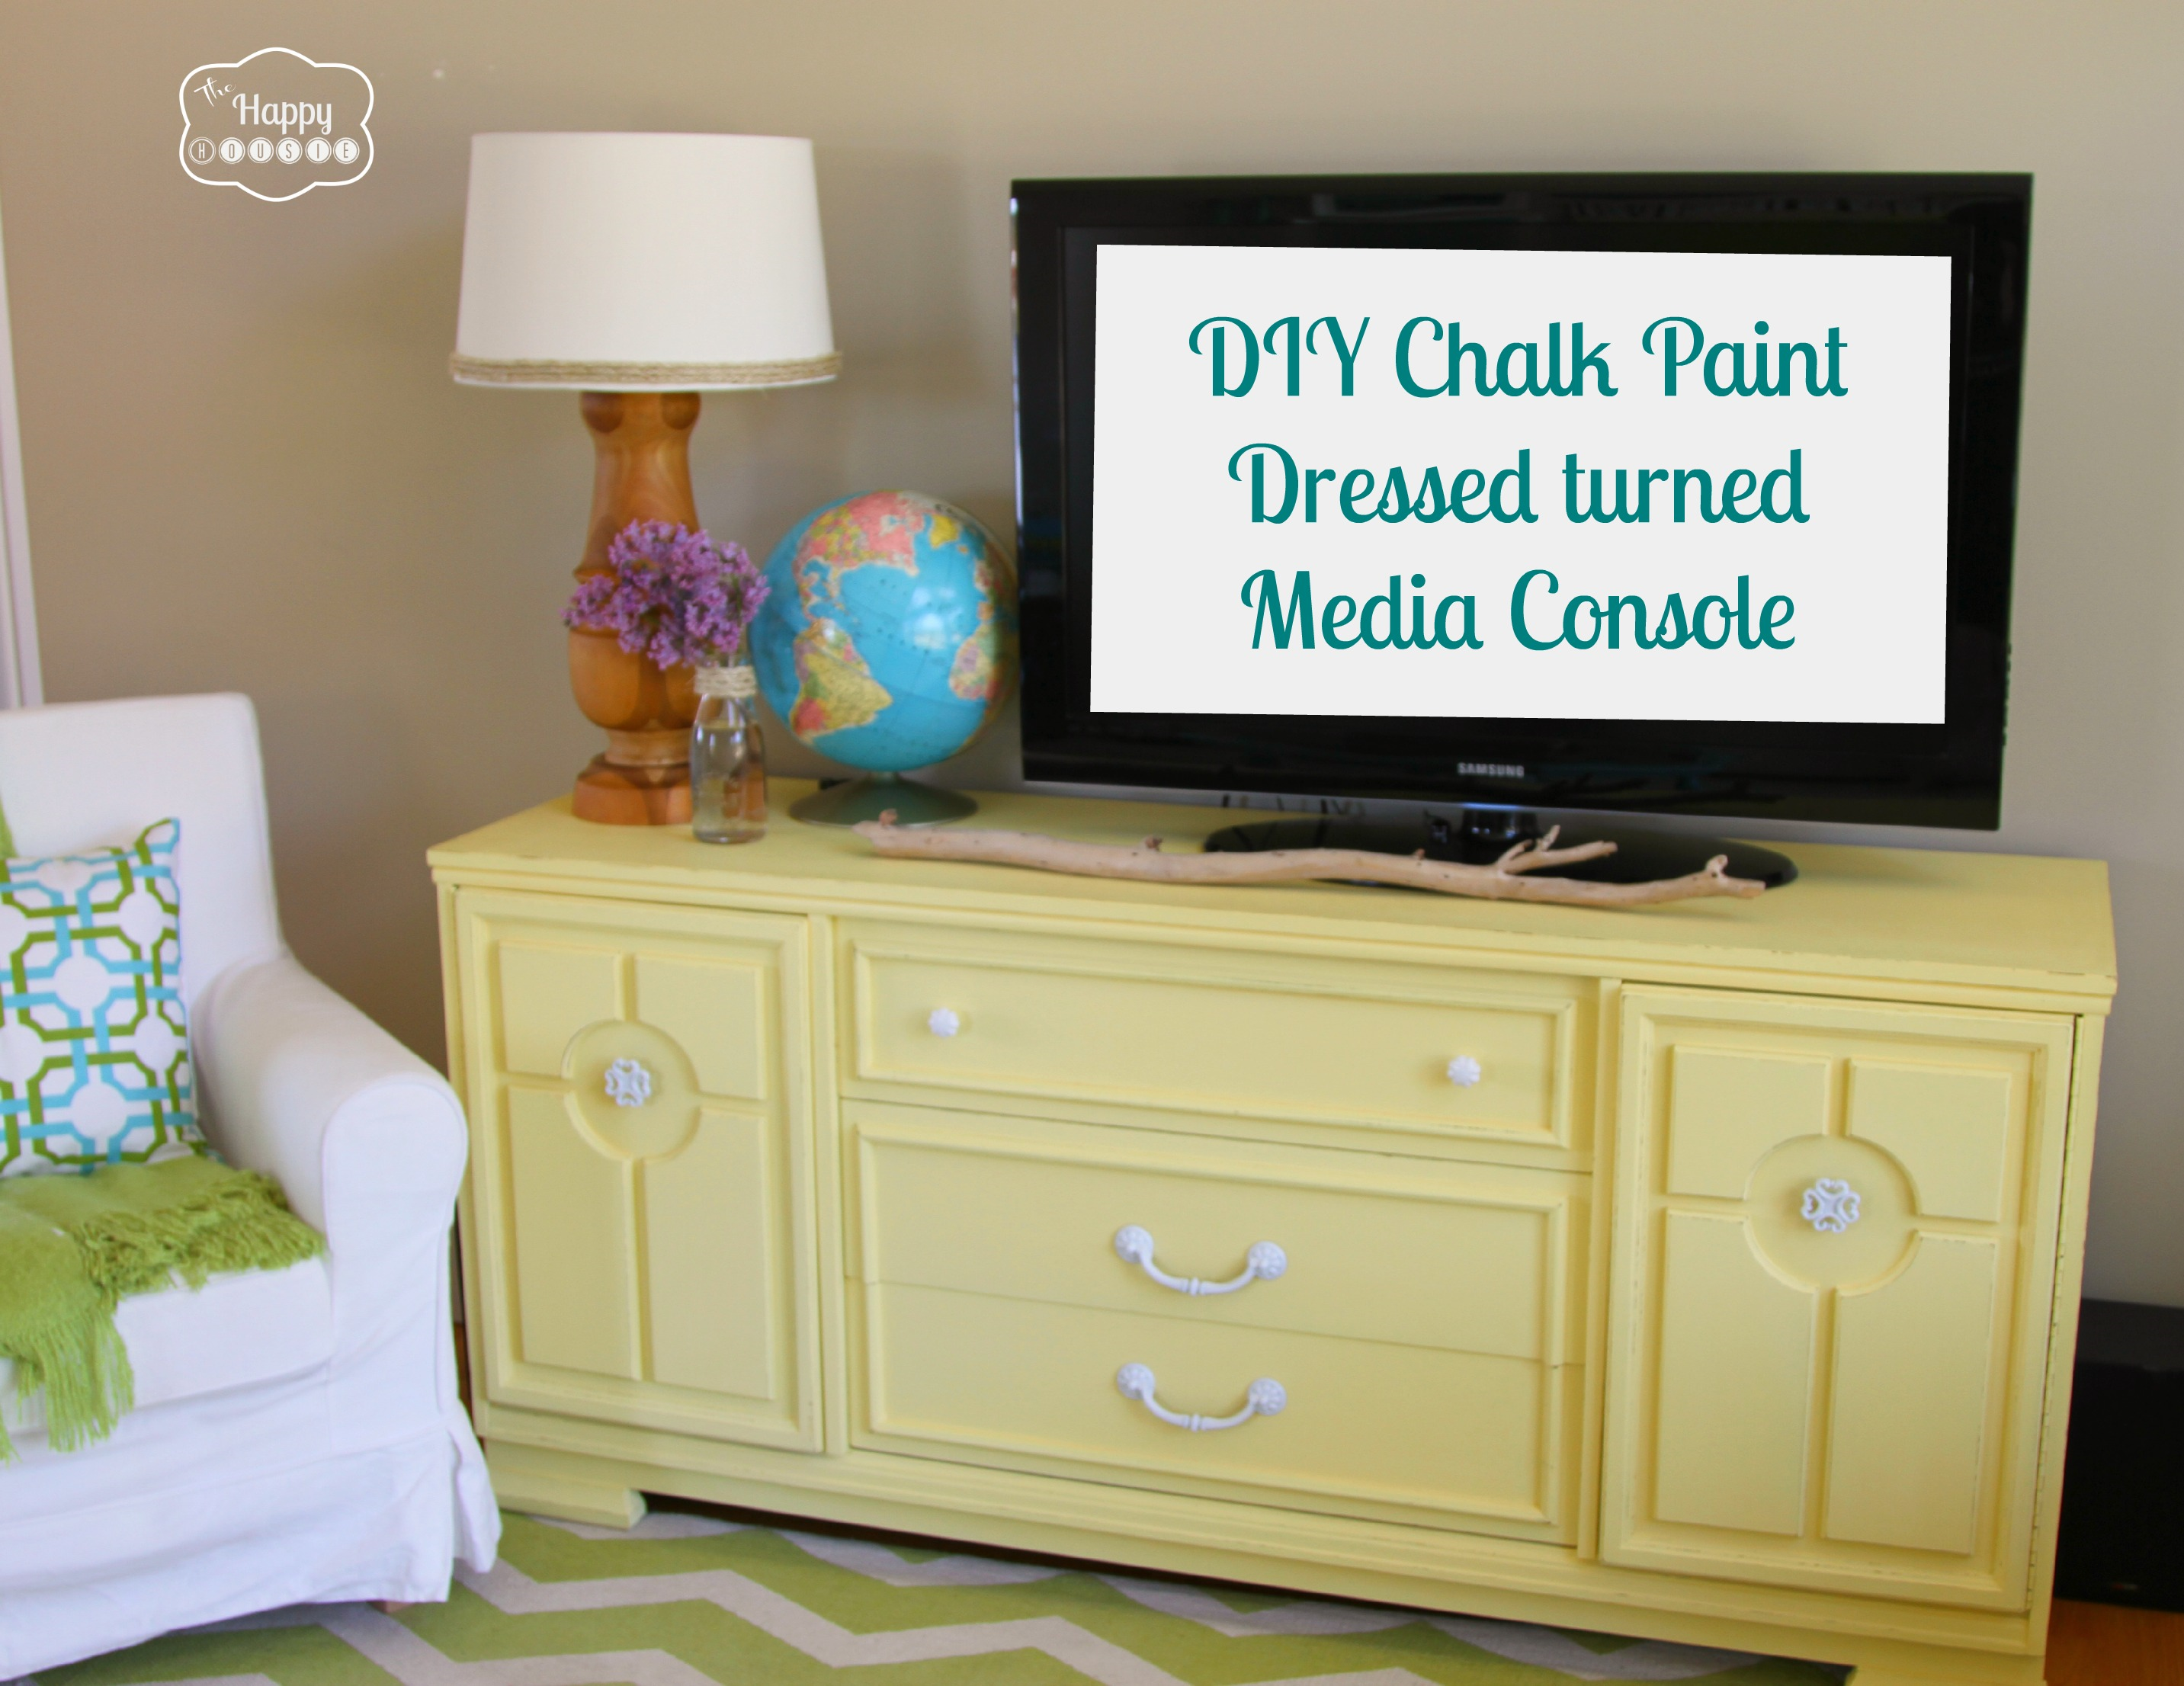 Lightening Up the Living Room with a DIY Chalk Paint Dresser turned Media Console